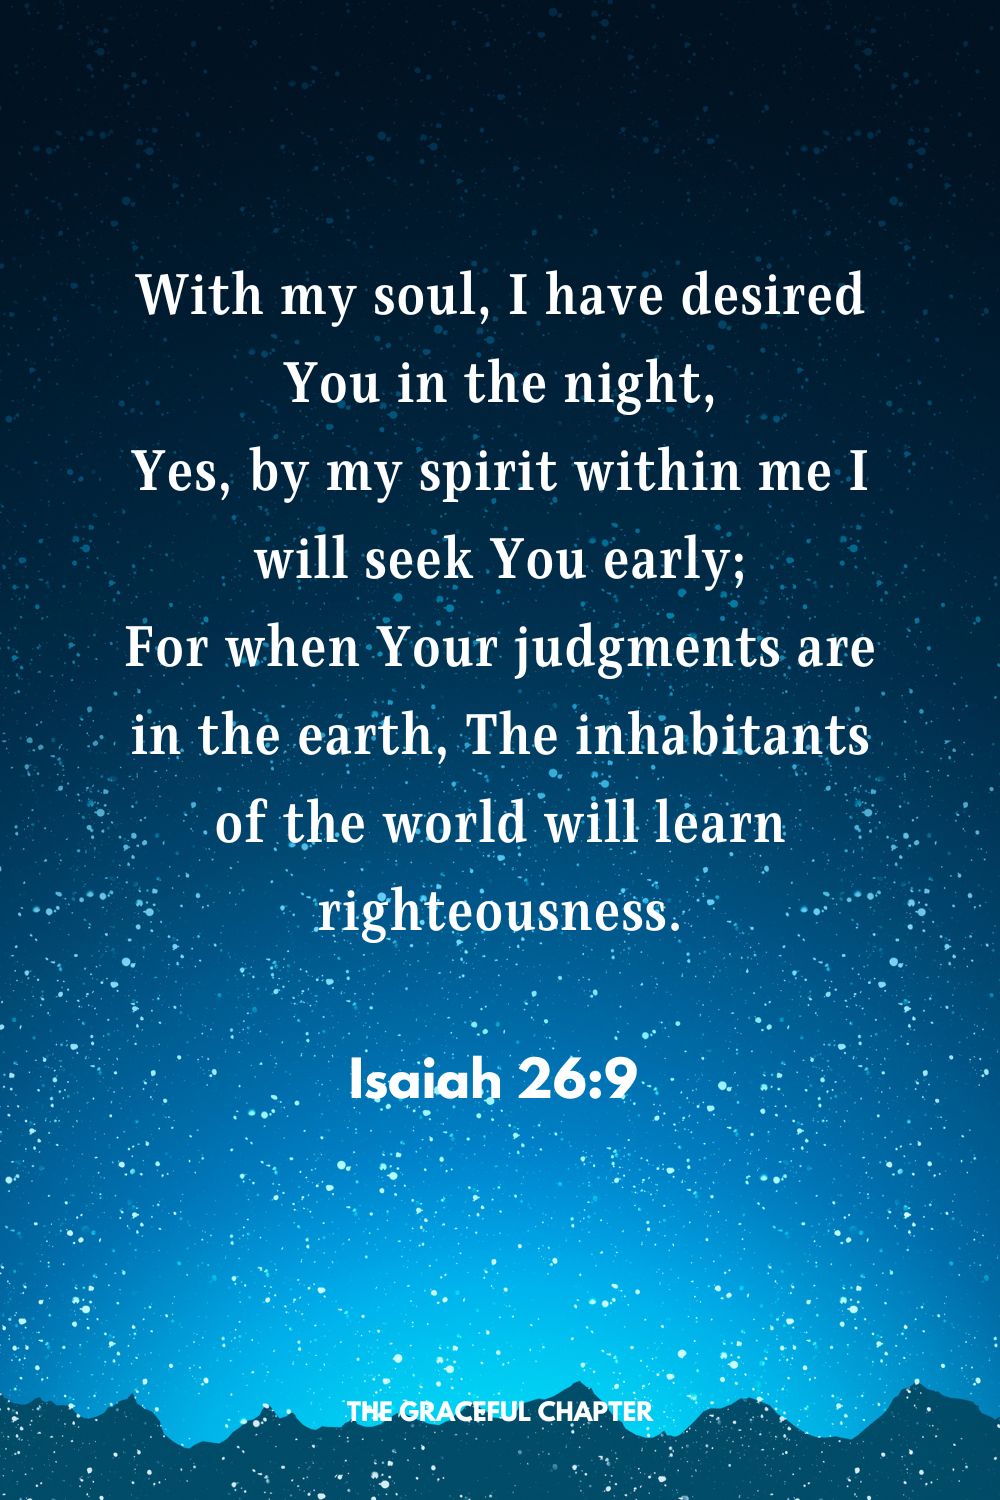 With my soul, I have desired You in the night, Yes, by my spirit within me I will seek You early; For when Your judgments are in the earth, The inhabitants of the world will learn righteousness. Isaiah 26:9 